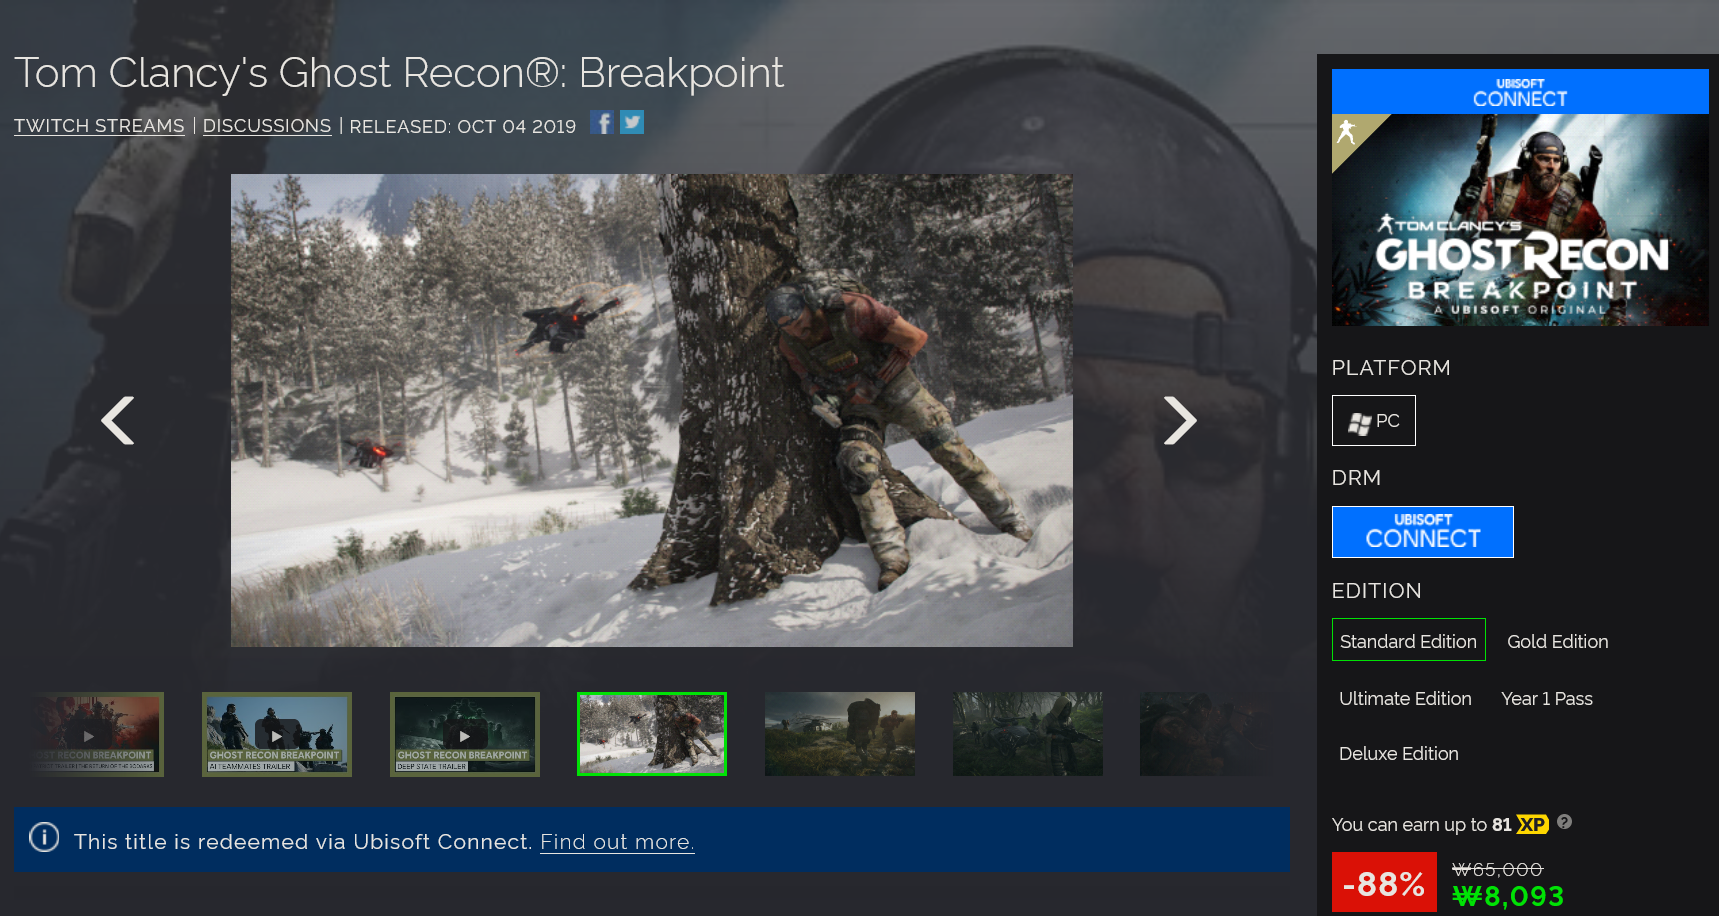 Screenshot 2021-10-06 at 20-48-11 Tom Clancy's Ghost Recon Breakpoint PC - Uplay Game Keys.png